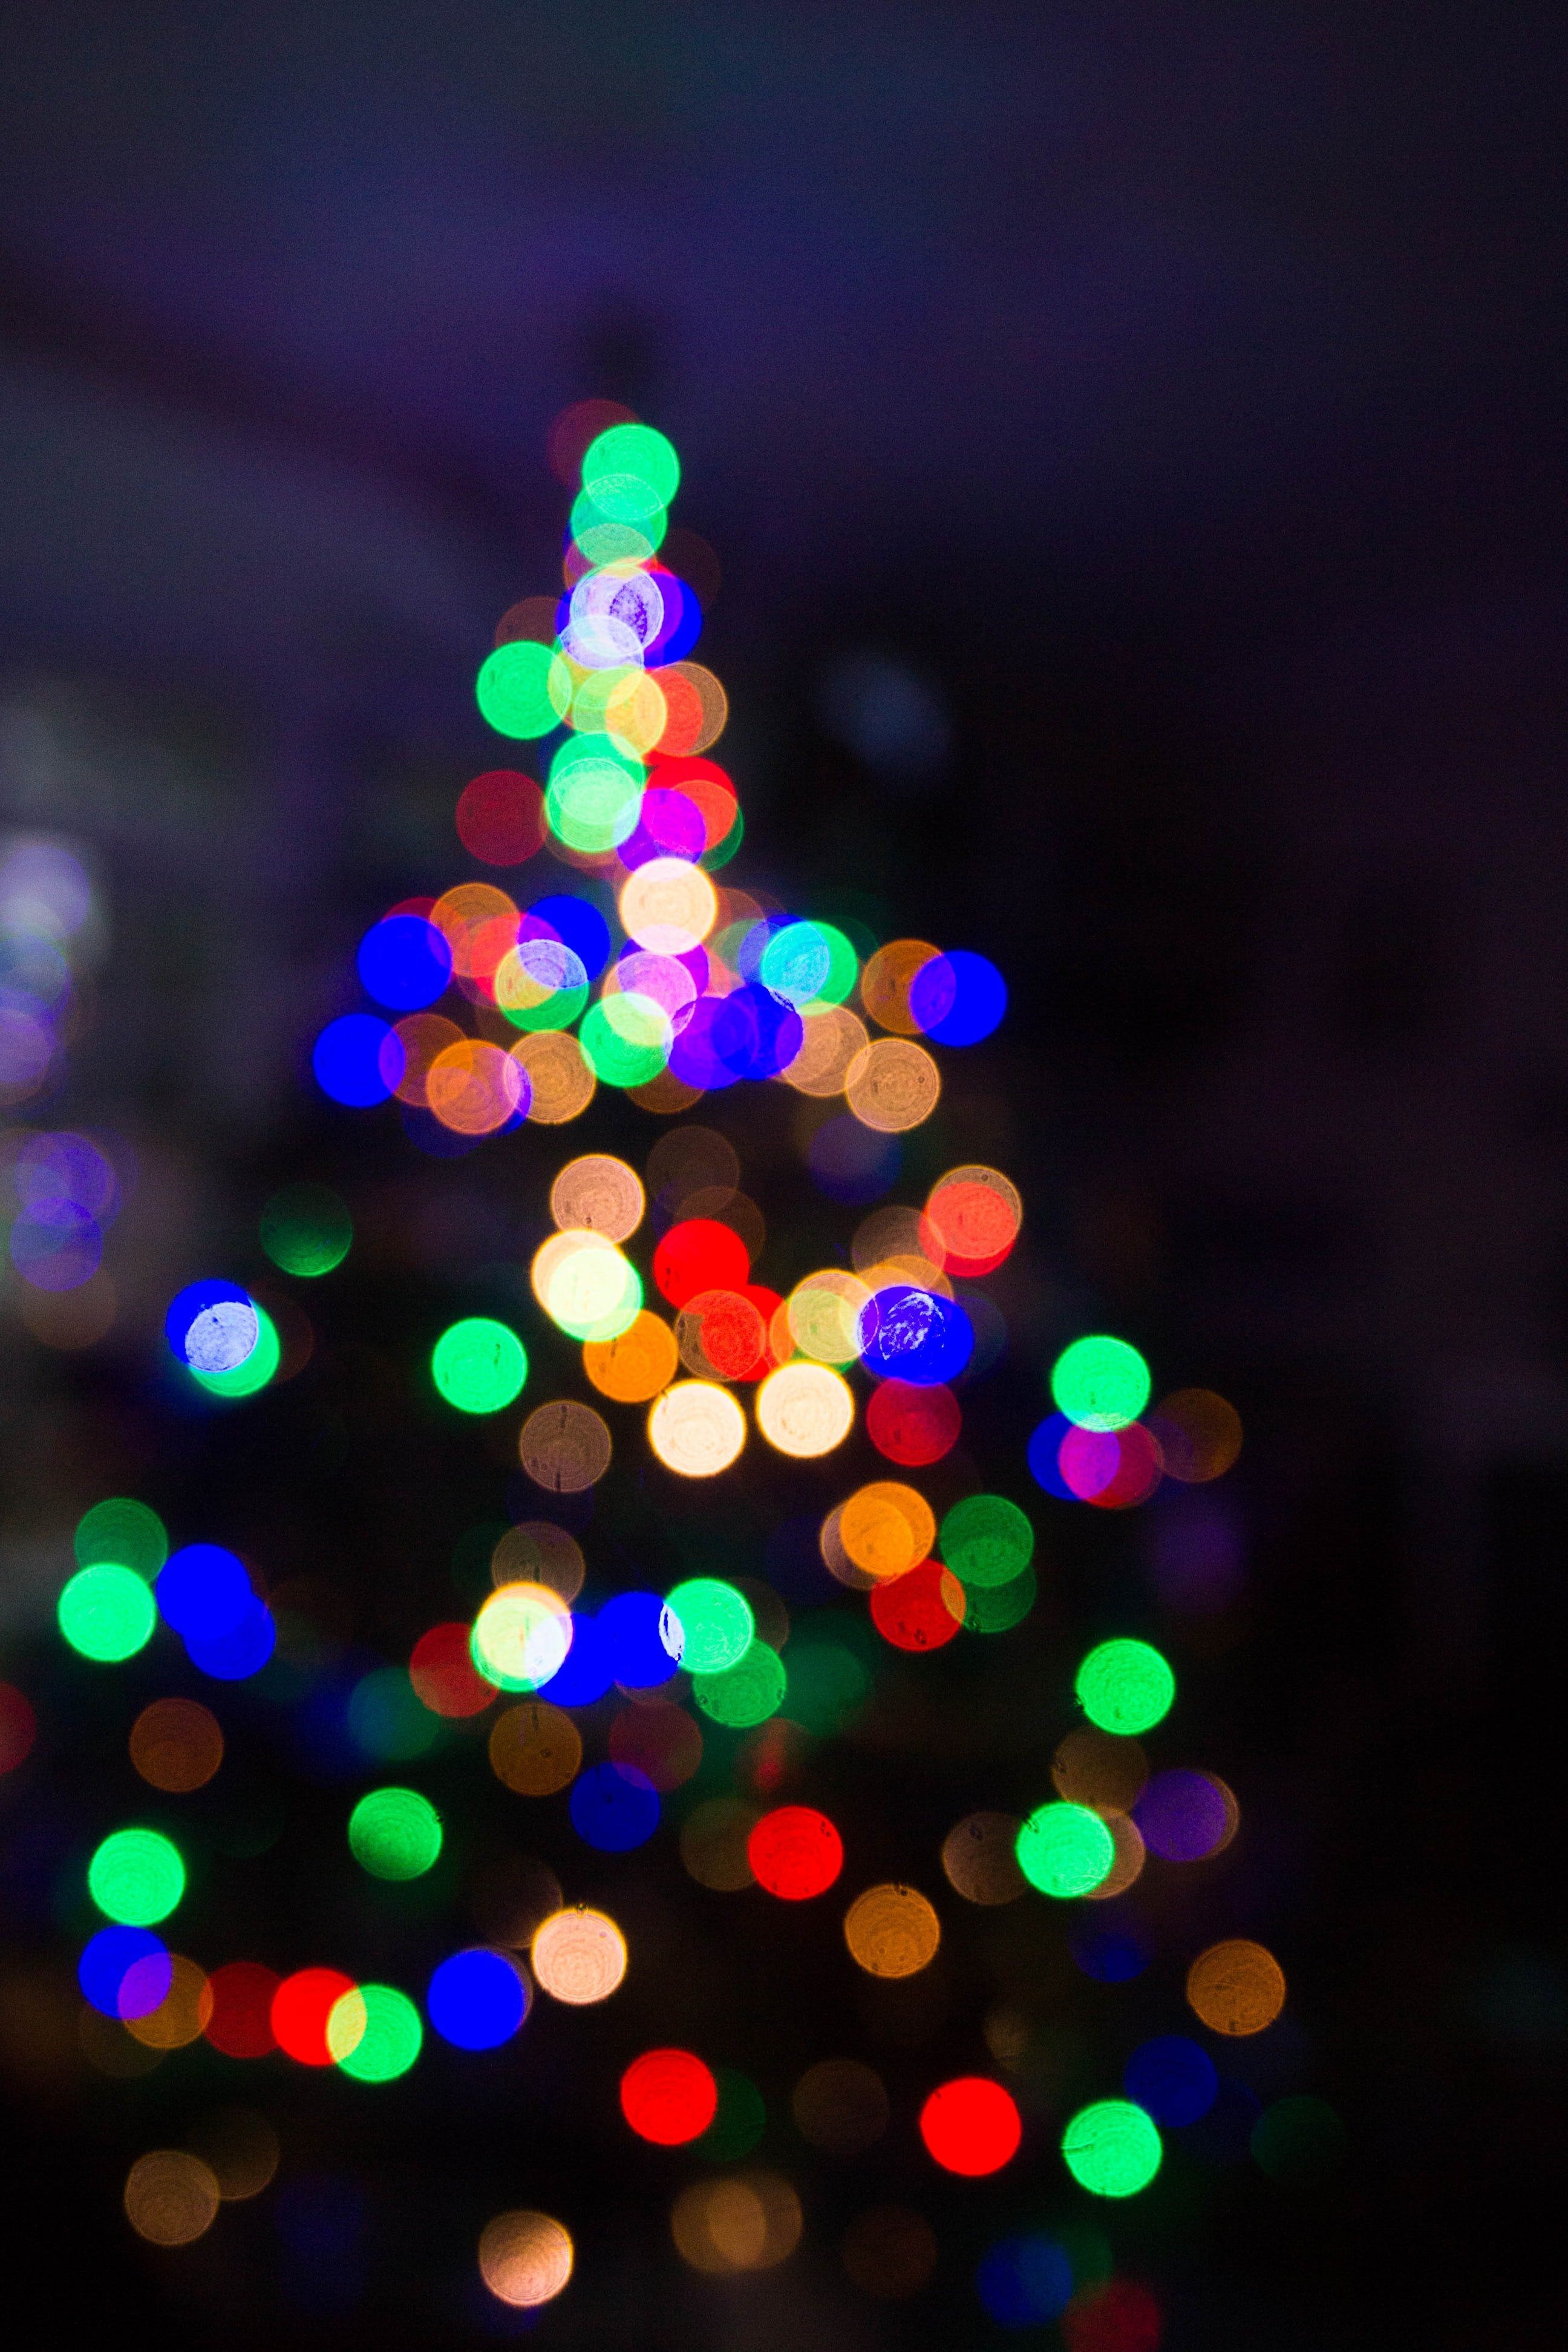 The Out Of Focus, Festive Lights On A Christmas Tree Create A Visual Blur Of Dark And Li. Christmas Traditions Family, Christmas Tree Picture, Christmas Picture